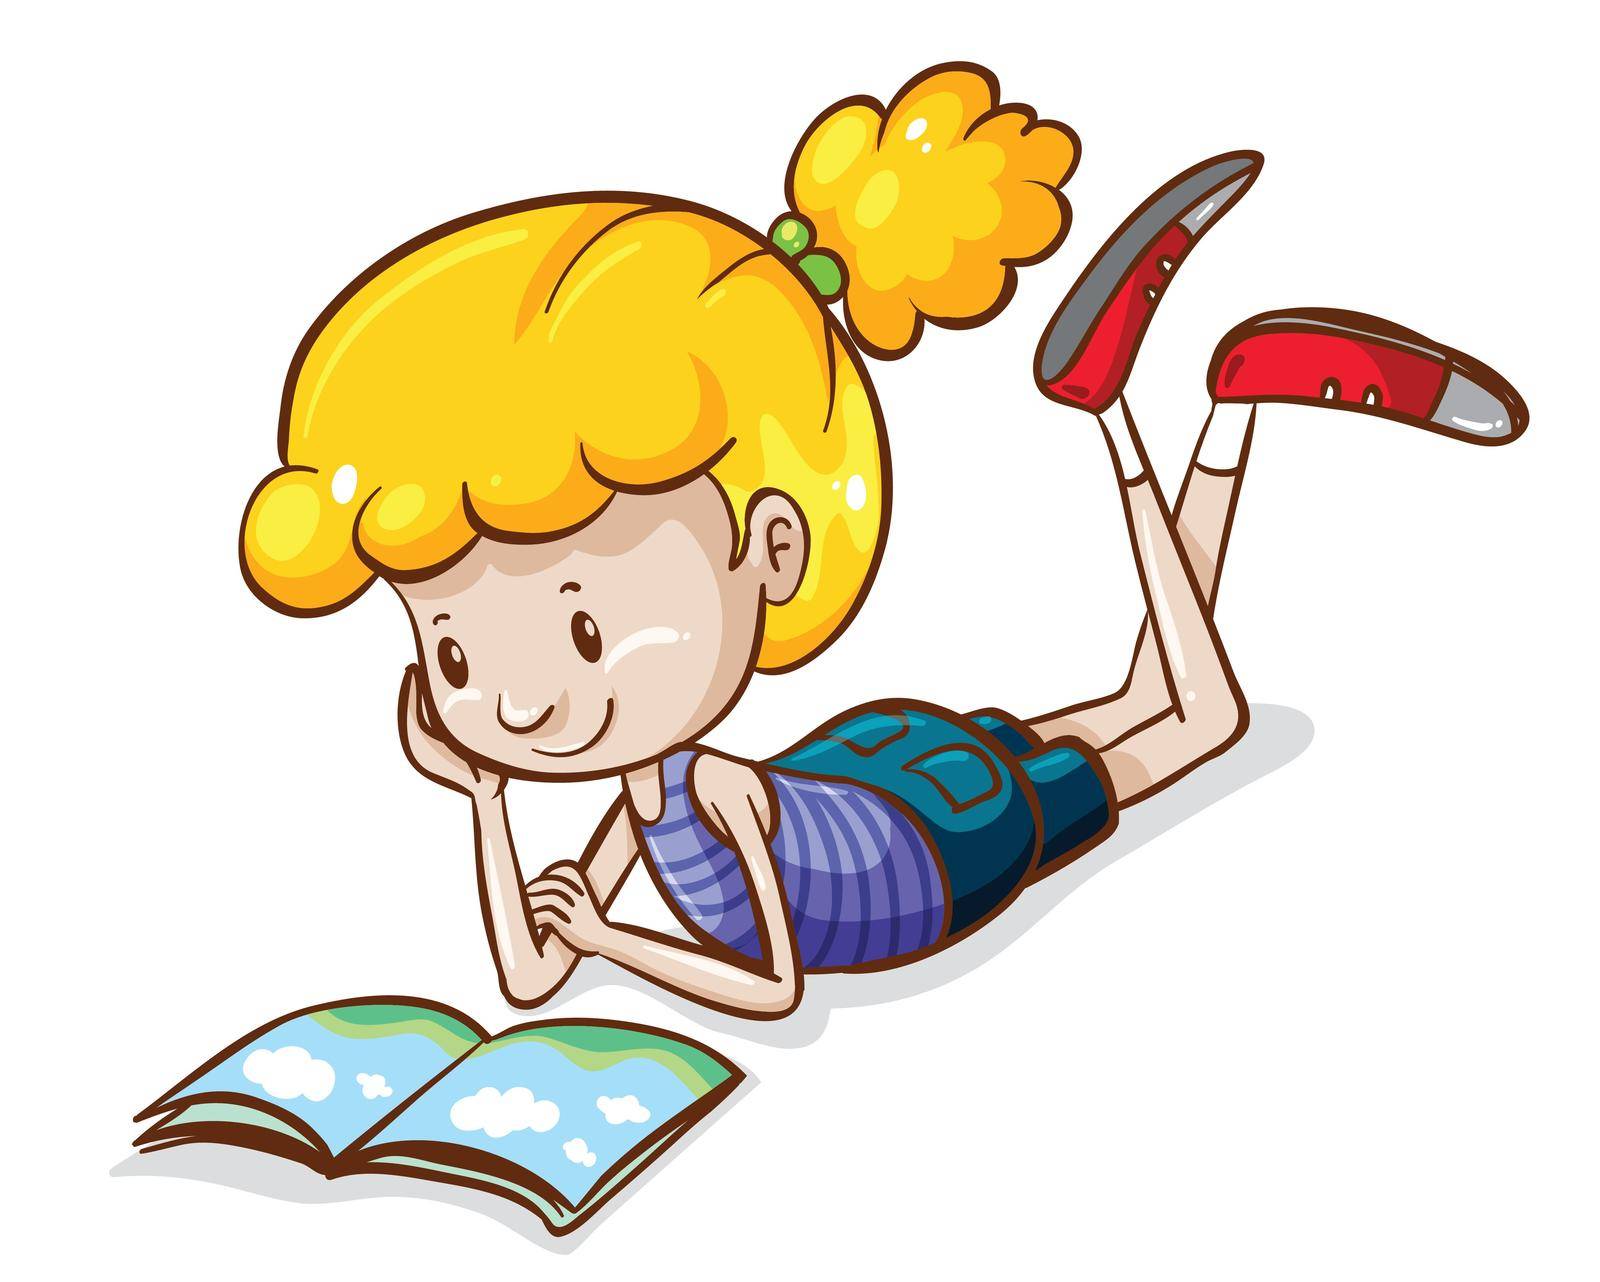 A simple sketch of a girl reading by iimages